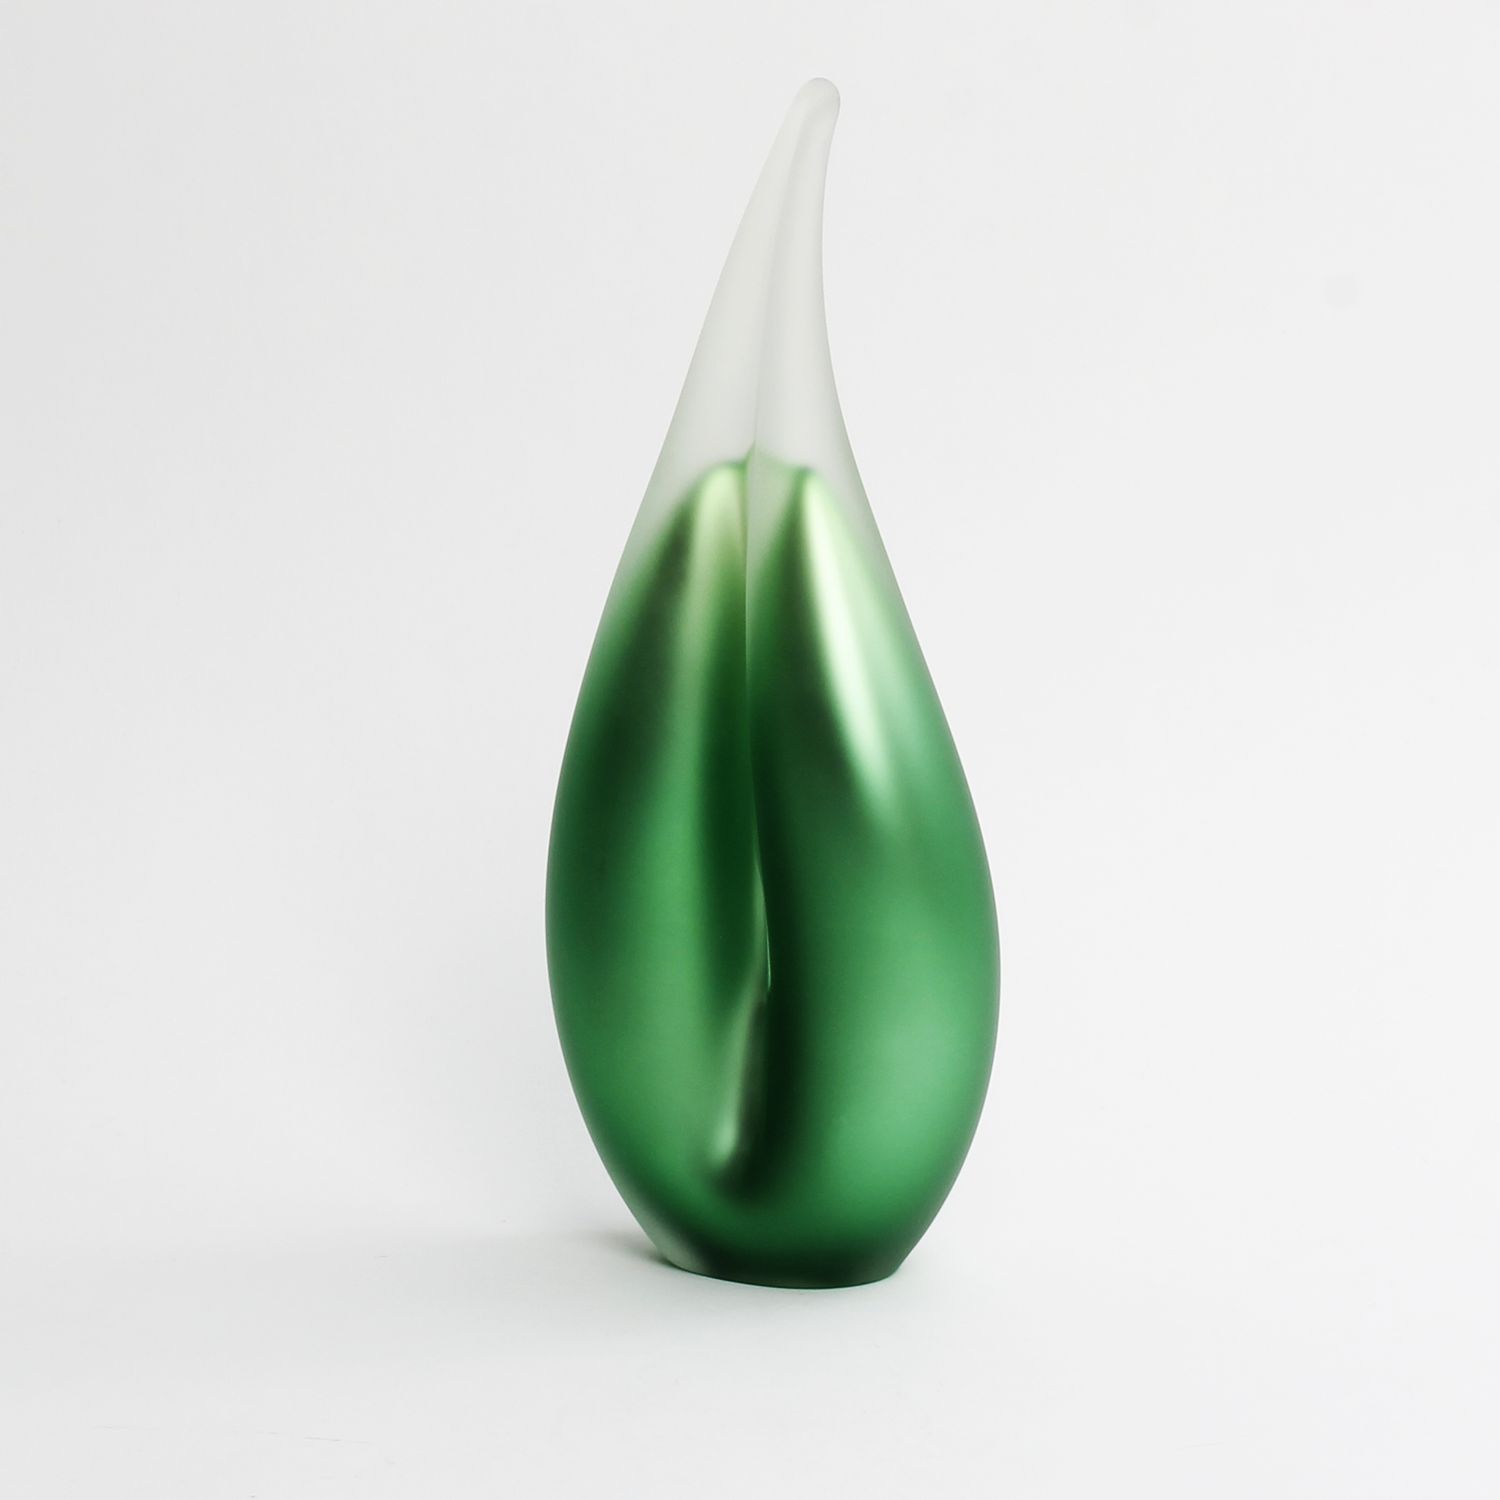 Soffi Studio: Small Green Pearl Flame Product Image 2 of 2